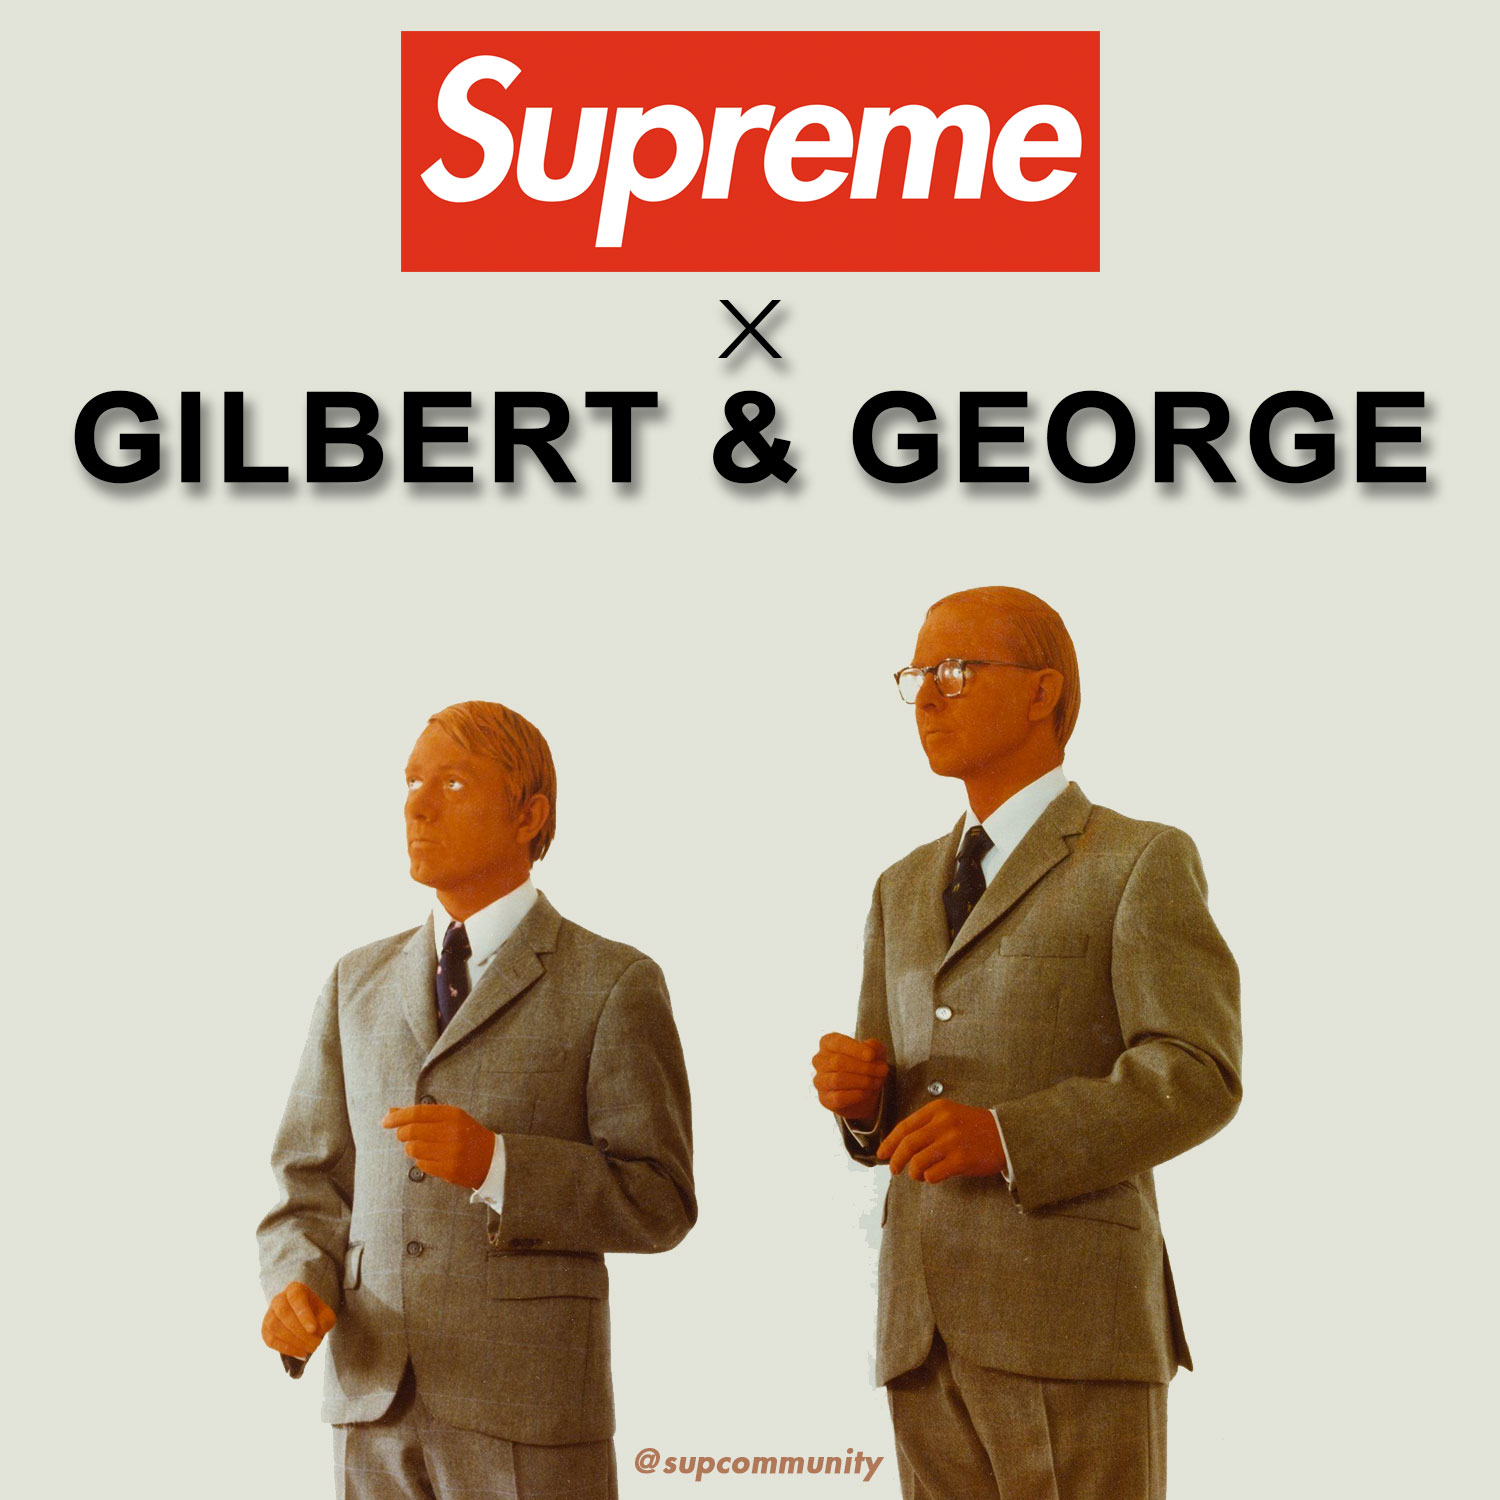 Gilbert & George for Supreme and Spring Tees